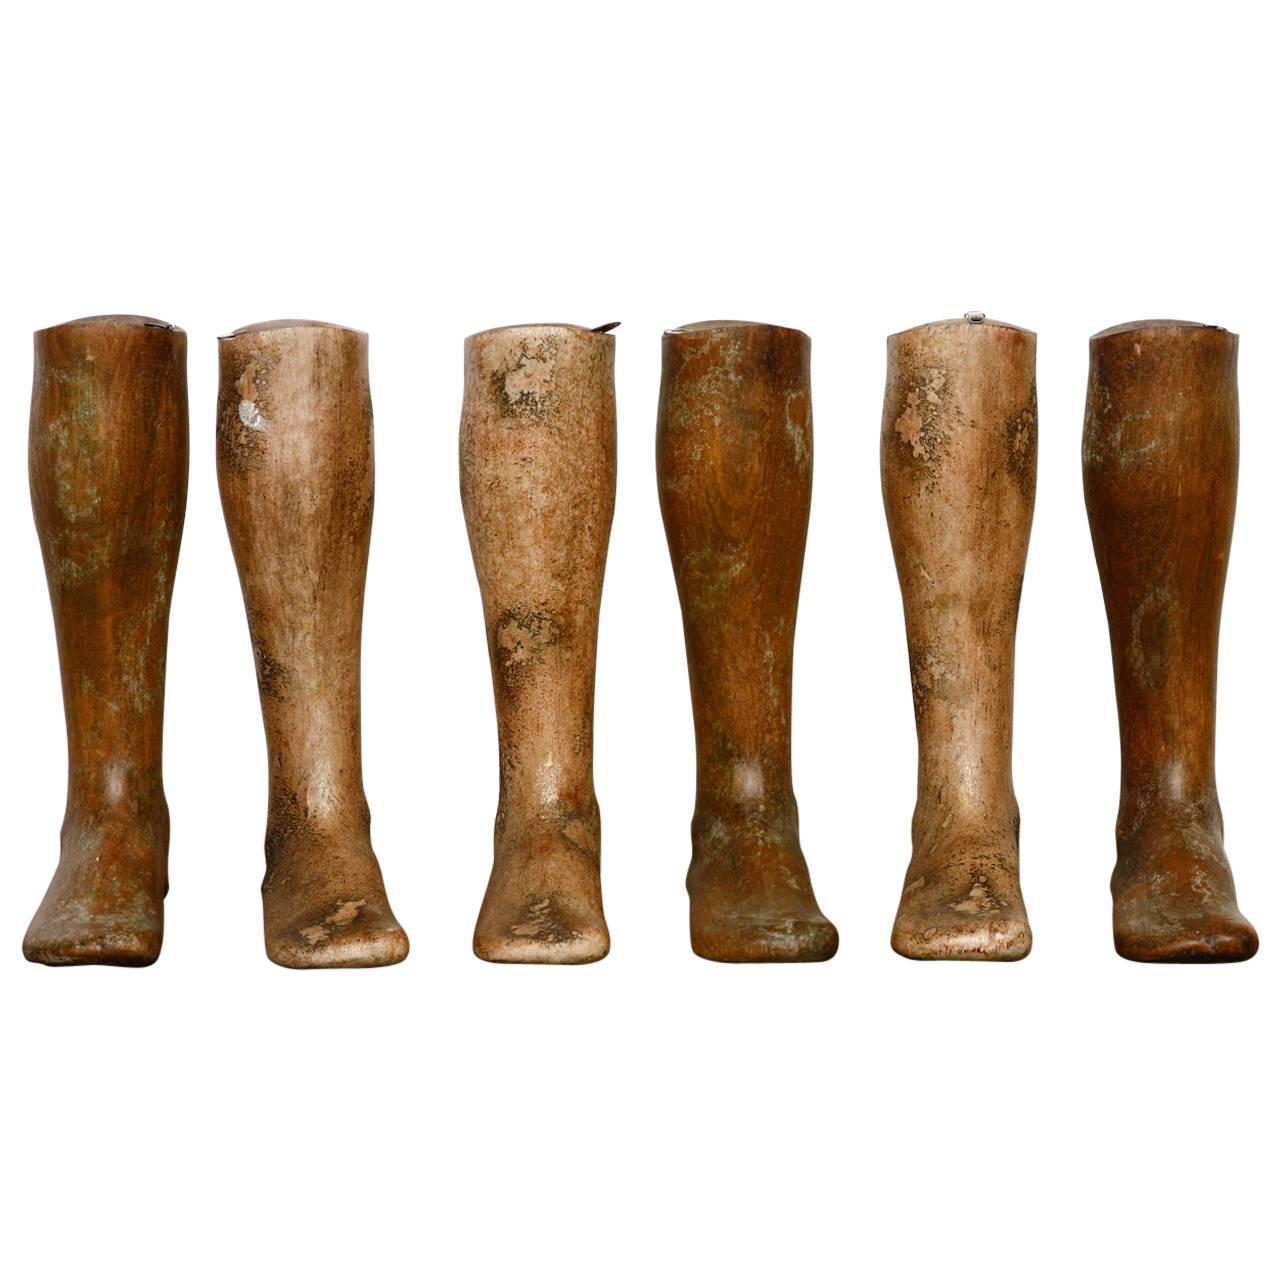 Fabulous set of six, 19th century wooden riding boot molds or boot forms. Features a solid hardwood construction and all six similarly sized. Each has a hook on the top allowing them to be hung on a wall for display. They all have a beautifully